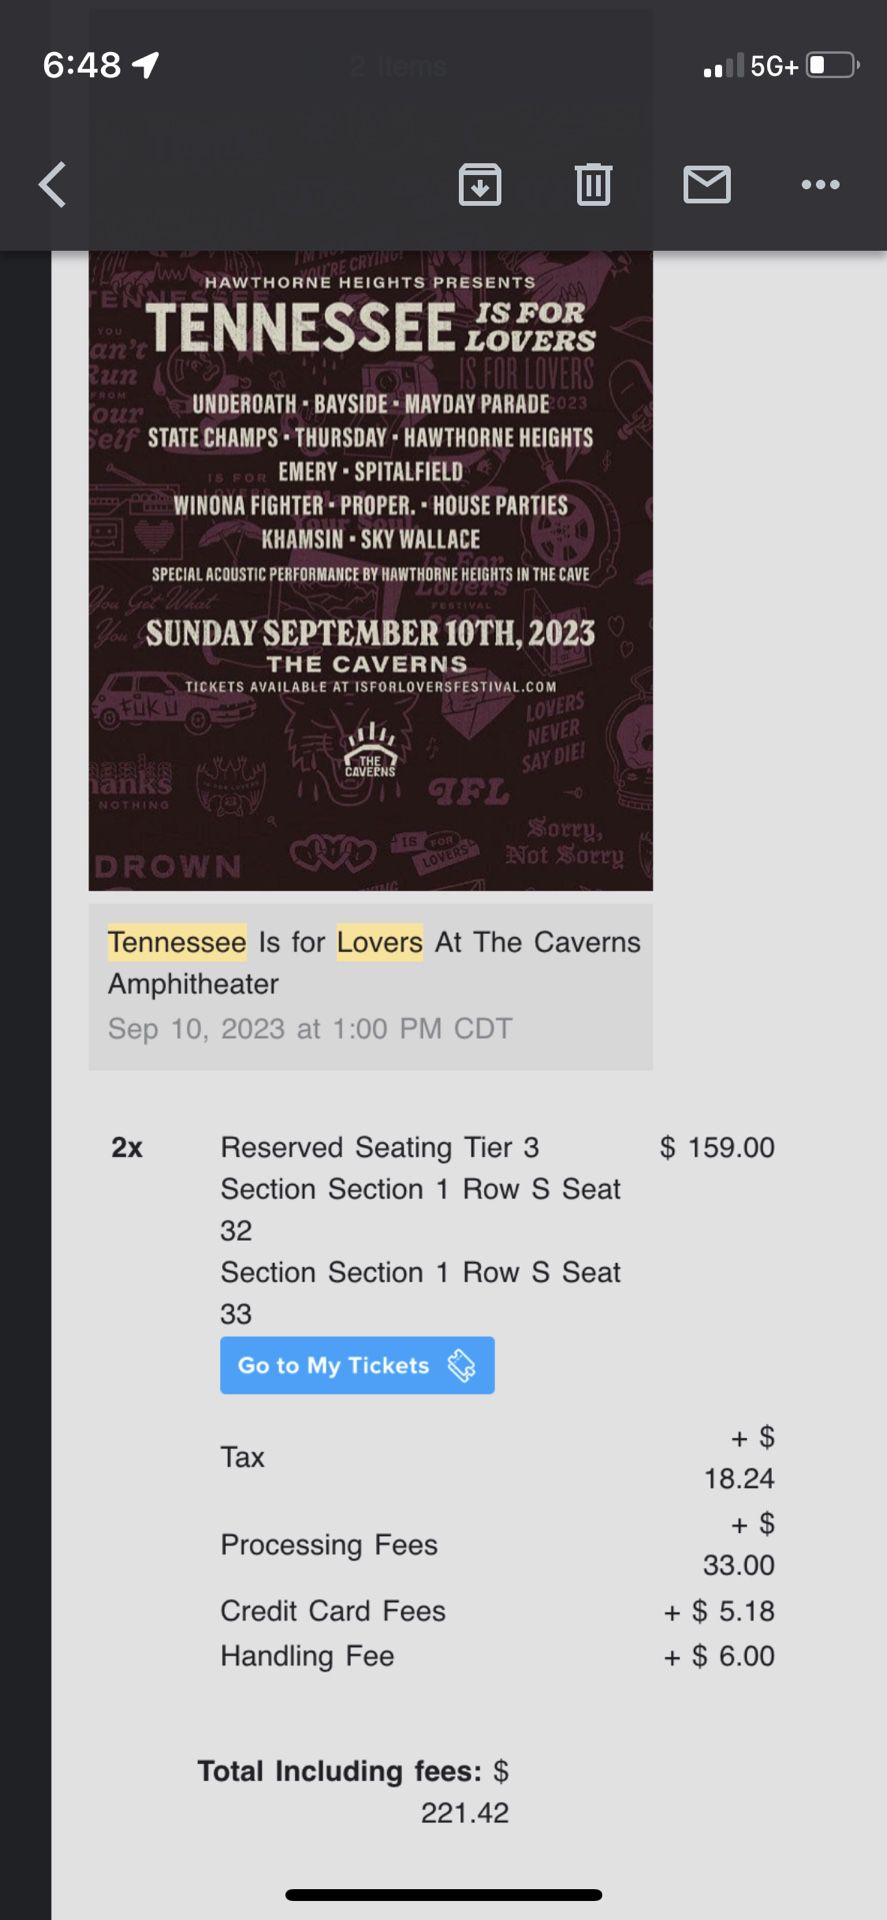 Tennessee is for Lovers concert 9/10/23 at The Caverns in Pelham, TN